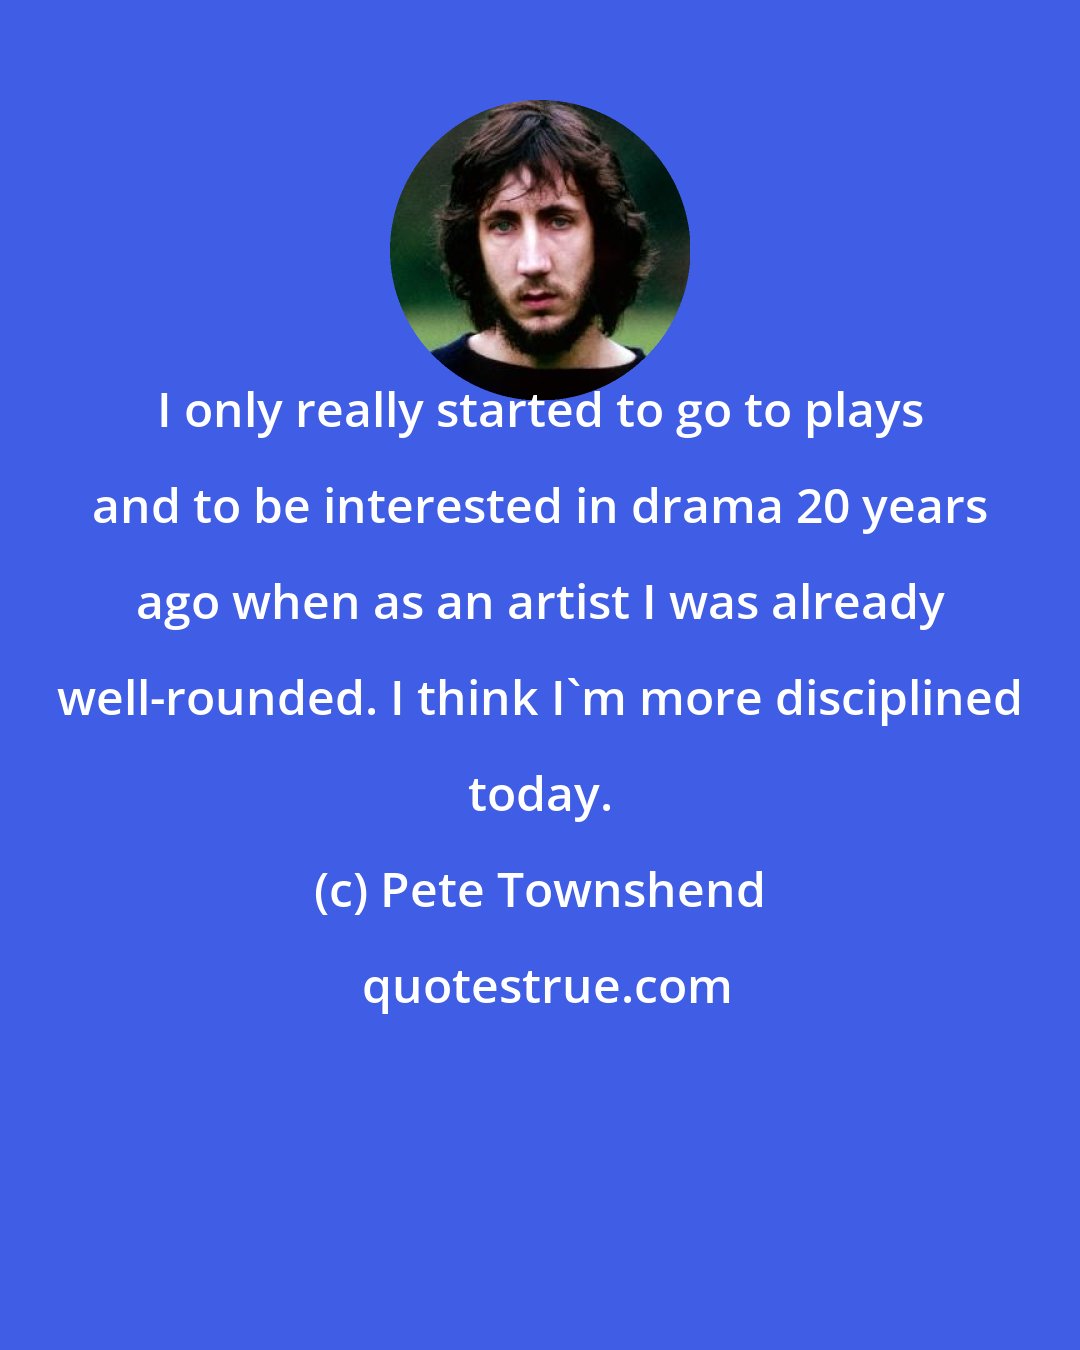 Pete Townshend: I only really started to go to plays and to be interested in drama 20 years ago when as an artist I was already well-rounded. I think I'm more disciplined today.